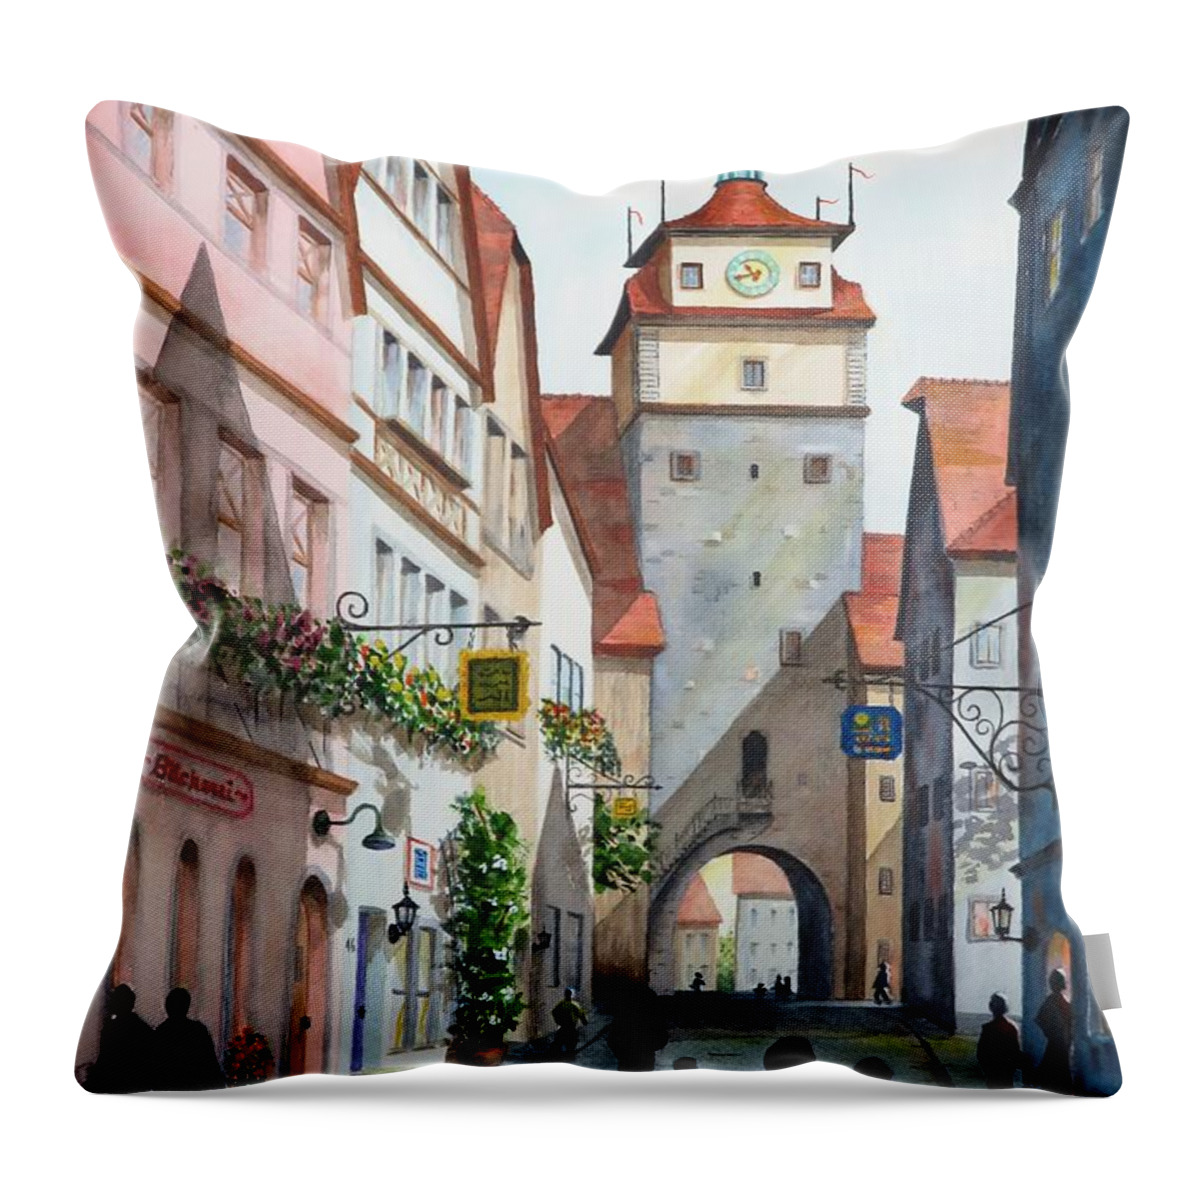 Tower Throw Pillow featuring the painting Rothenburg Tower by Joseph Burger